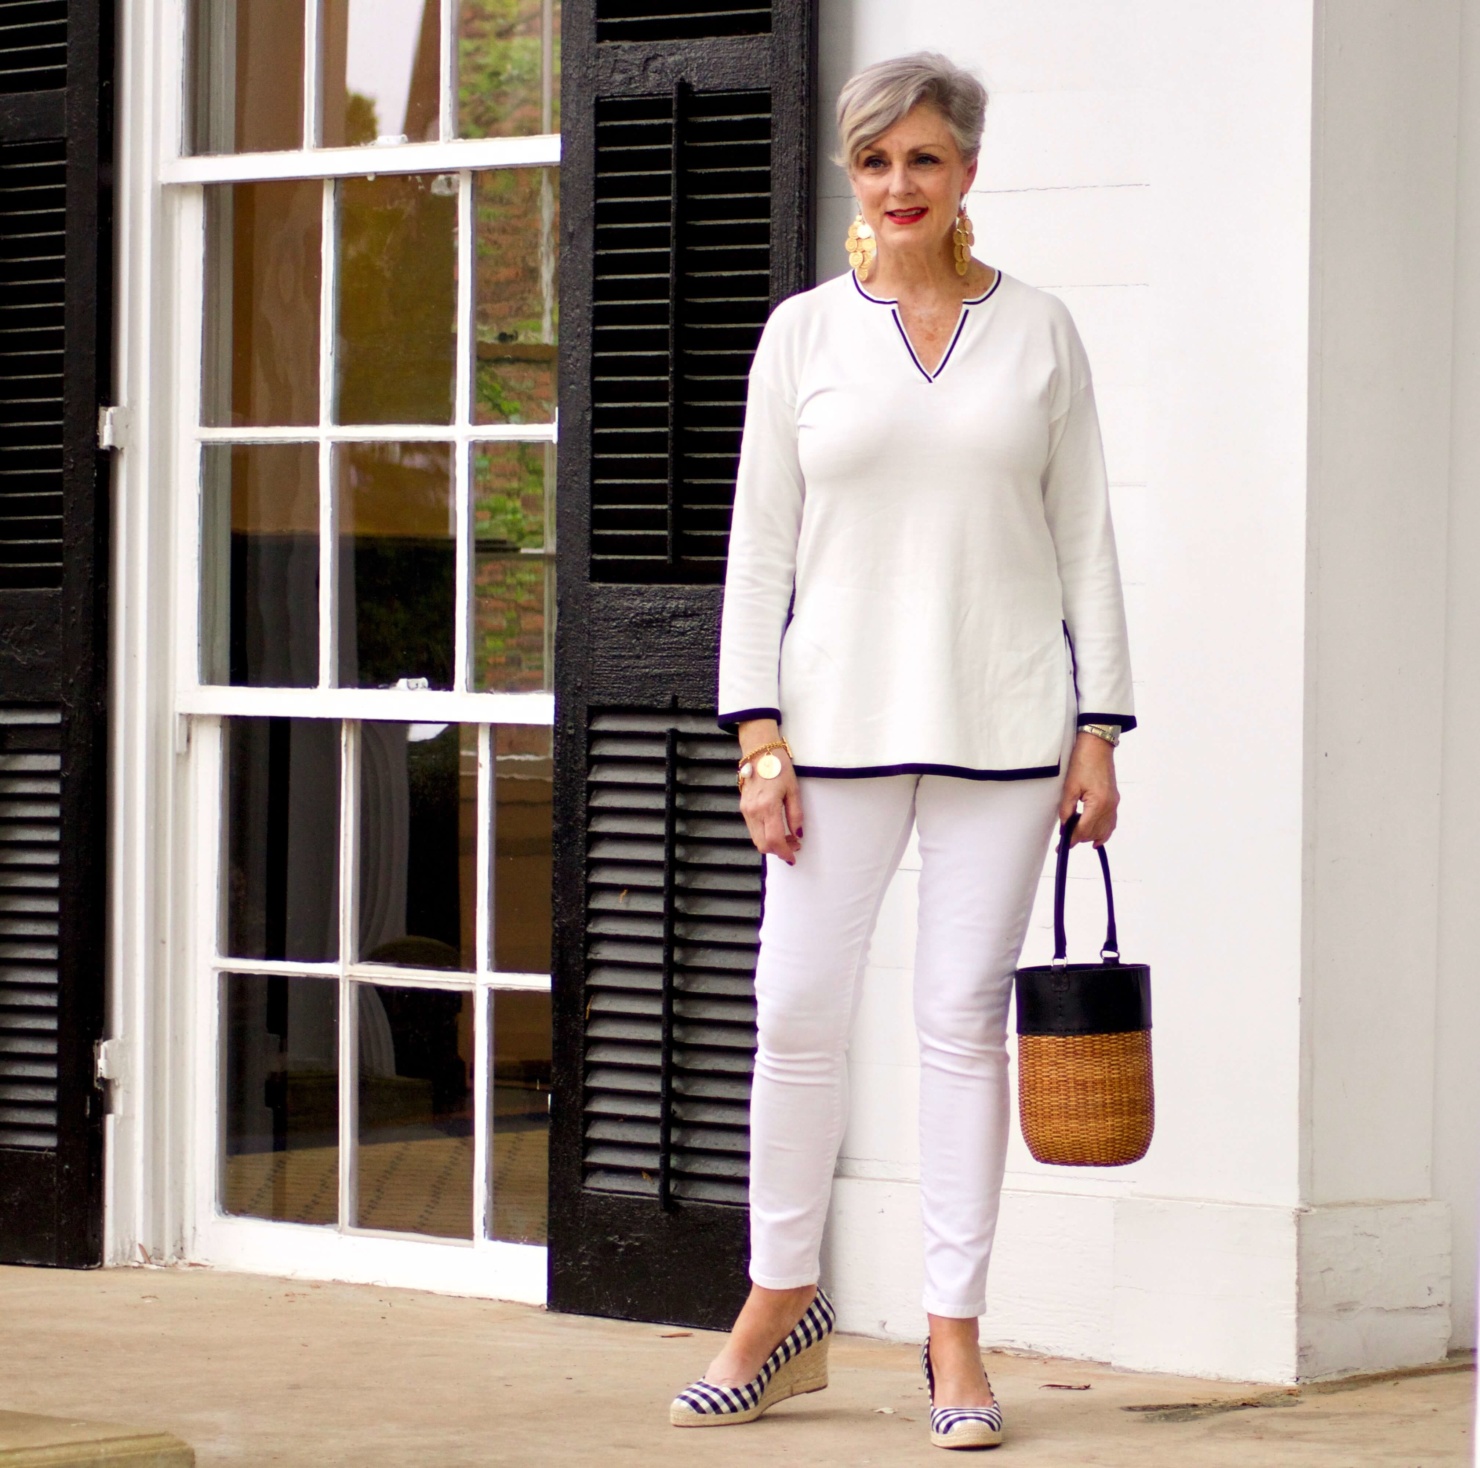 beth from Style at a Certain Age wears a monochromatic white outfit. white tunic trimmed in blue, white jeans and gingham espadrilles